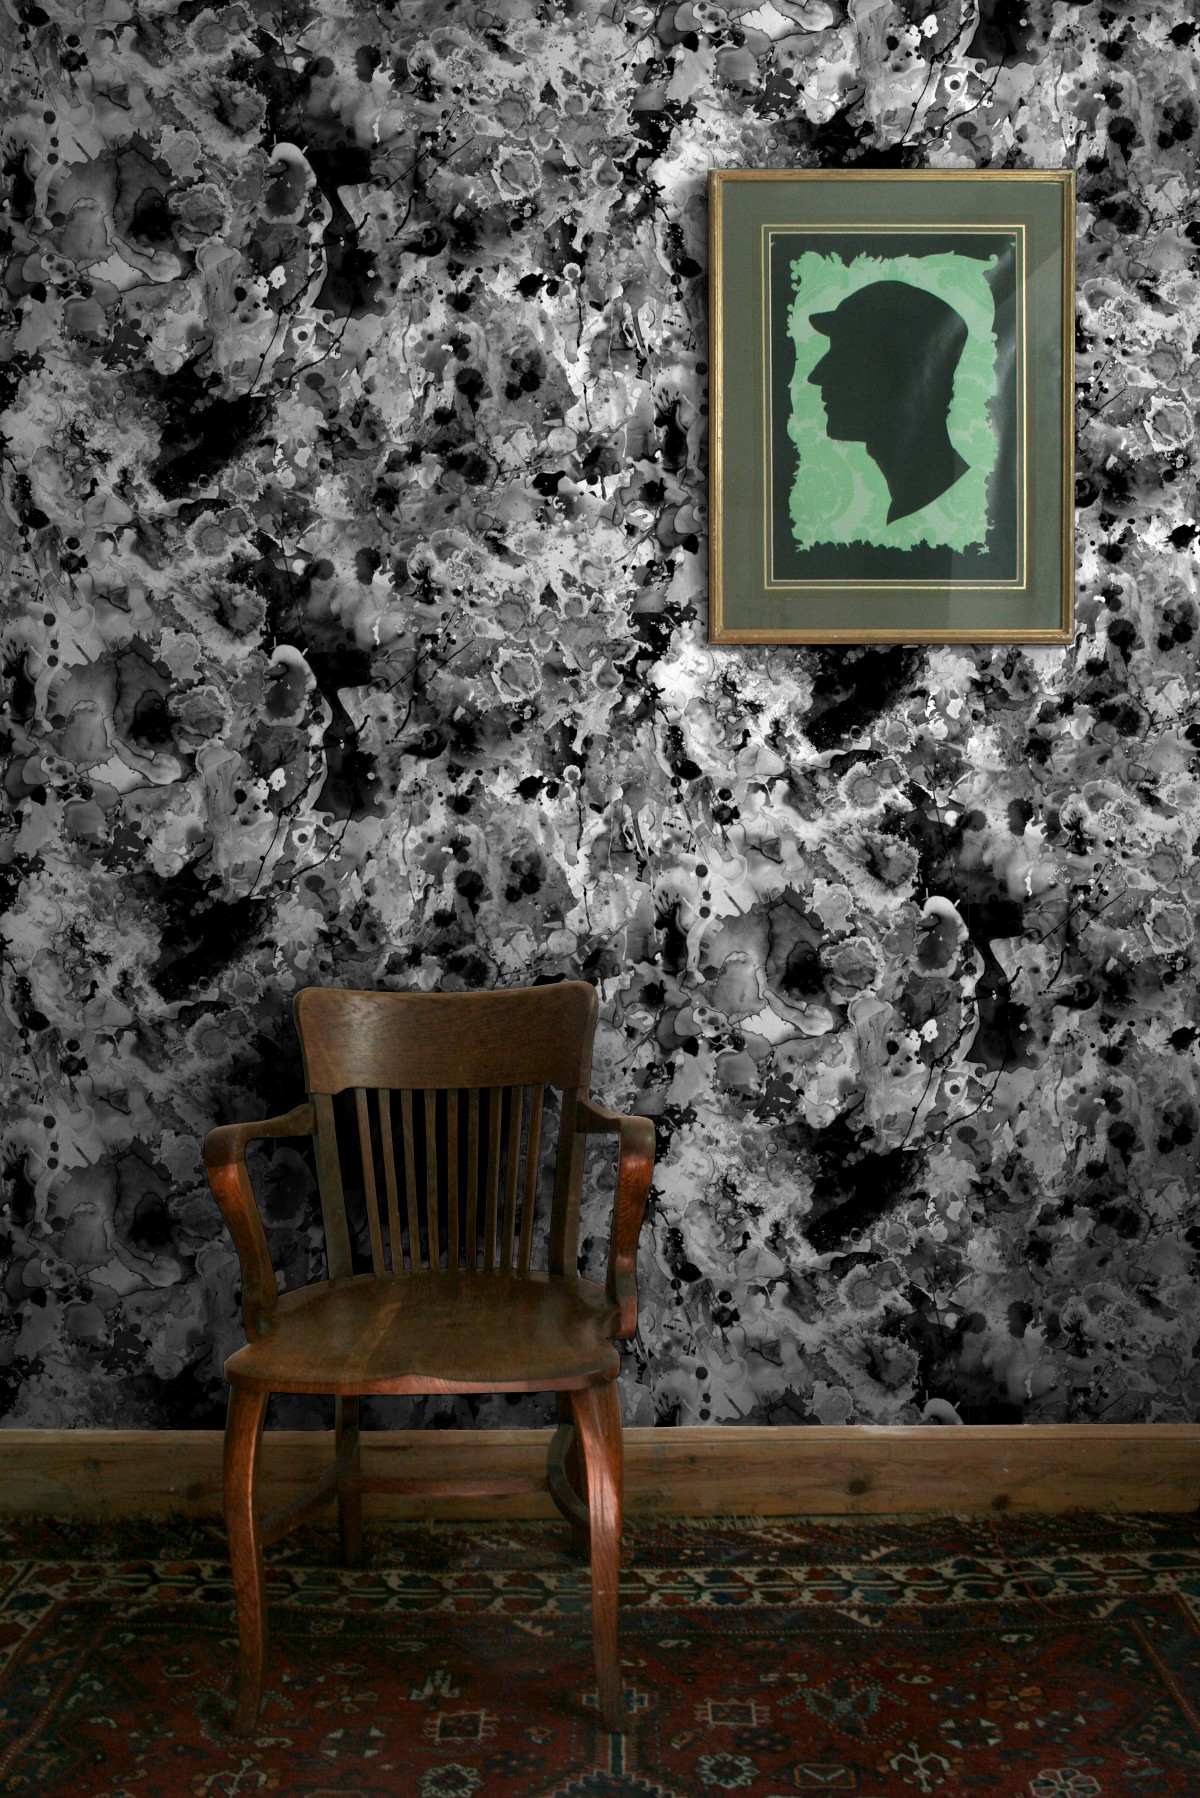 kaleido splat allover superwide wallpaper by timorous beasties on adorn.house